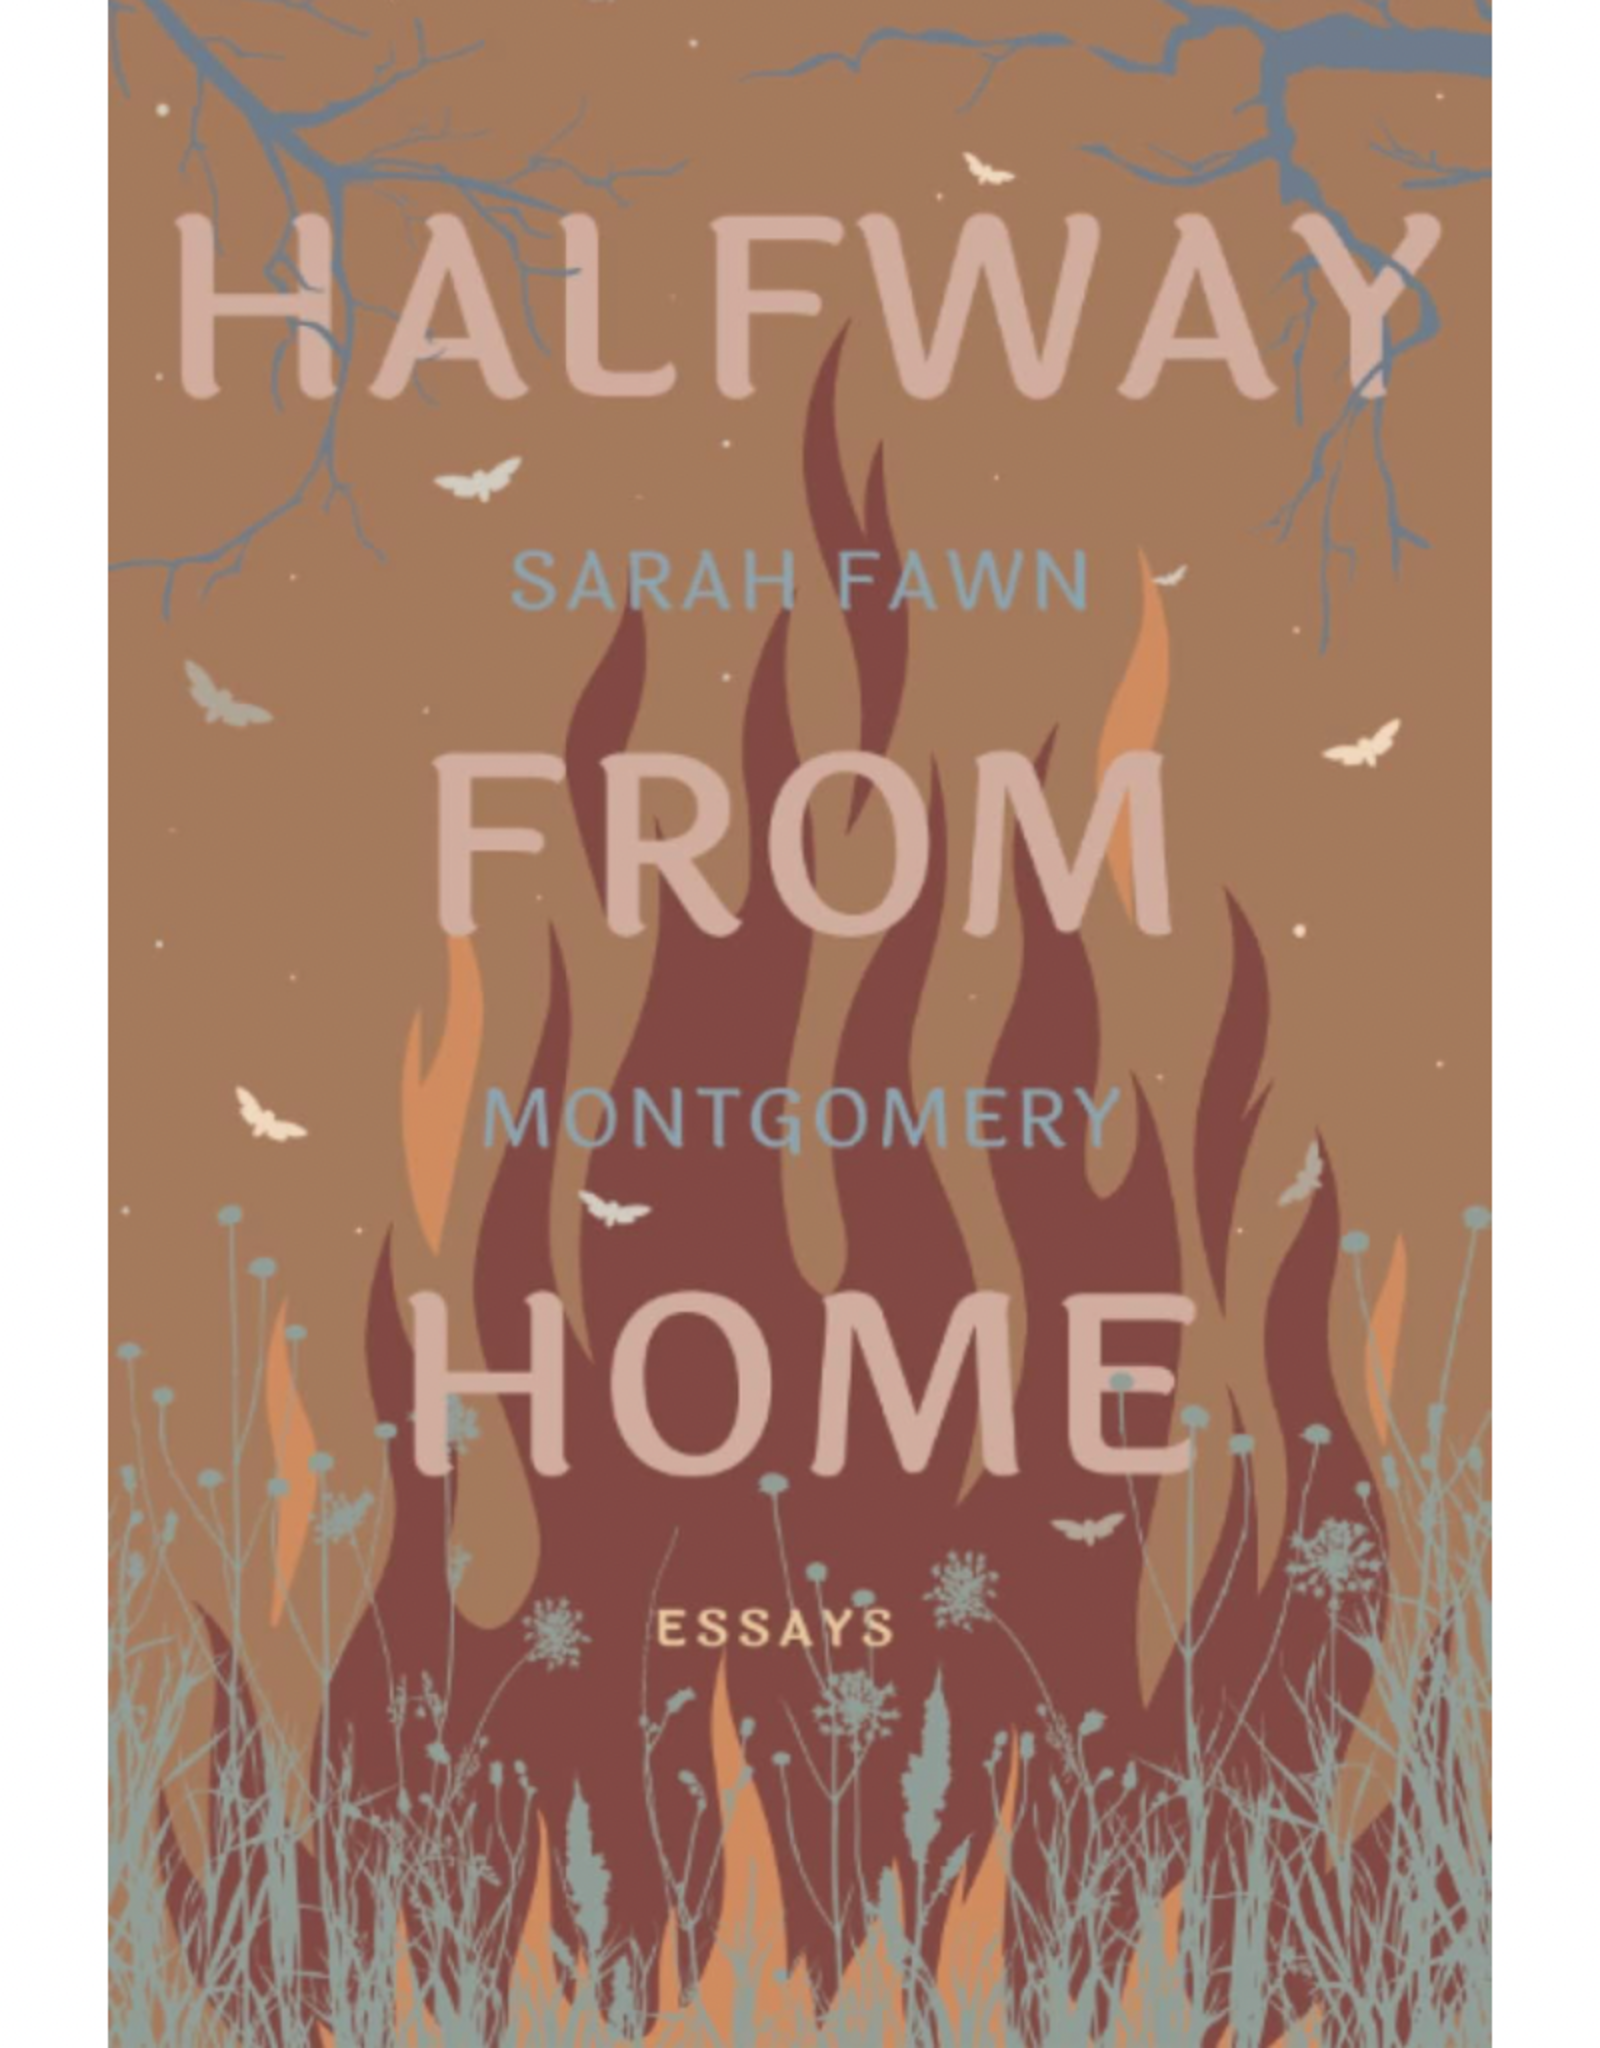 Halfway From Home: Essays